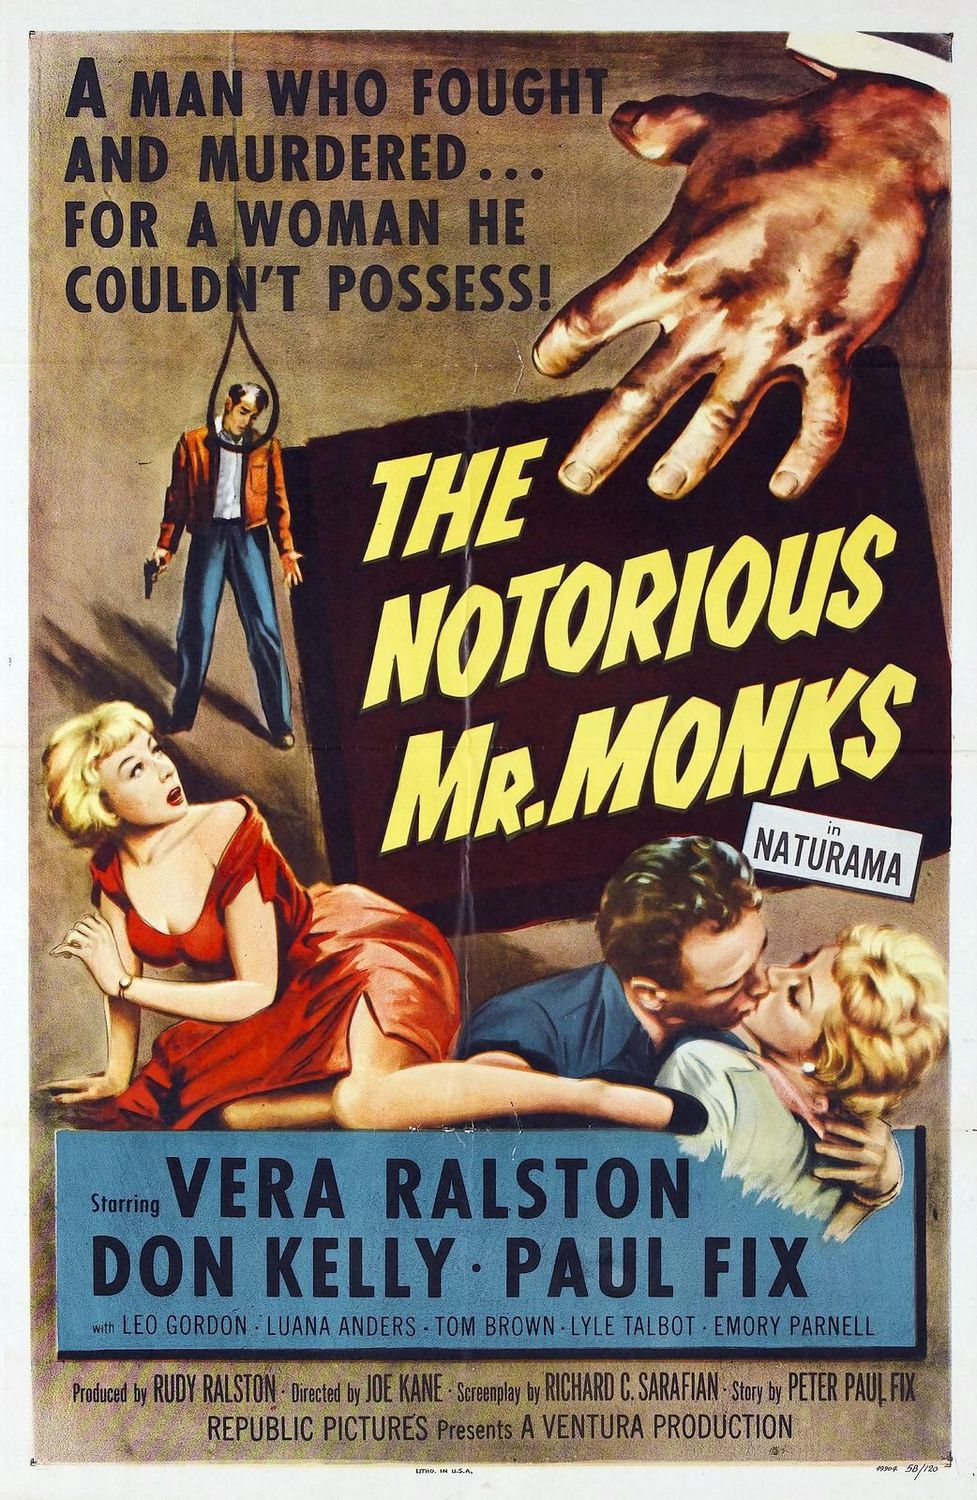 Extra Large Movie Poster Image for The Notorious Mr. Monks 